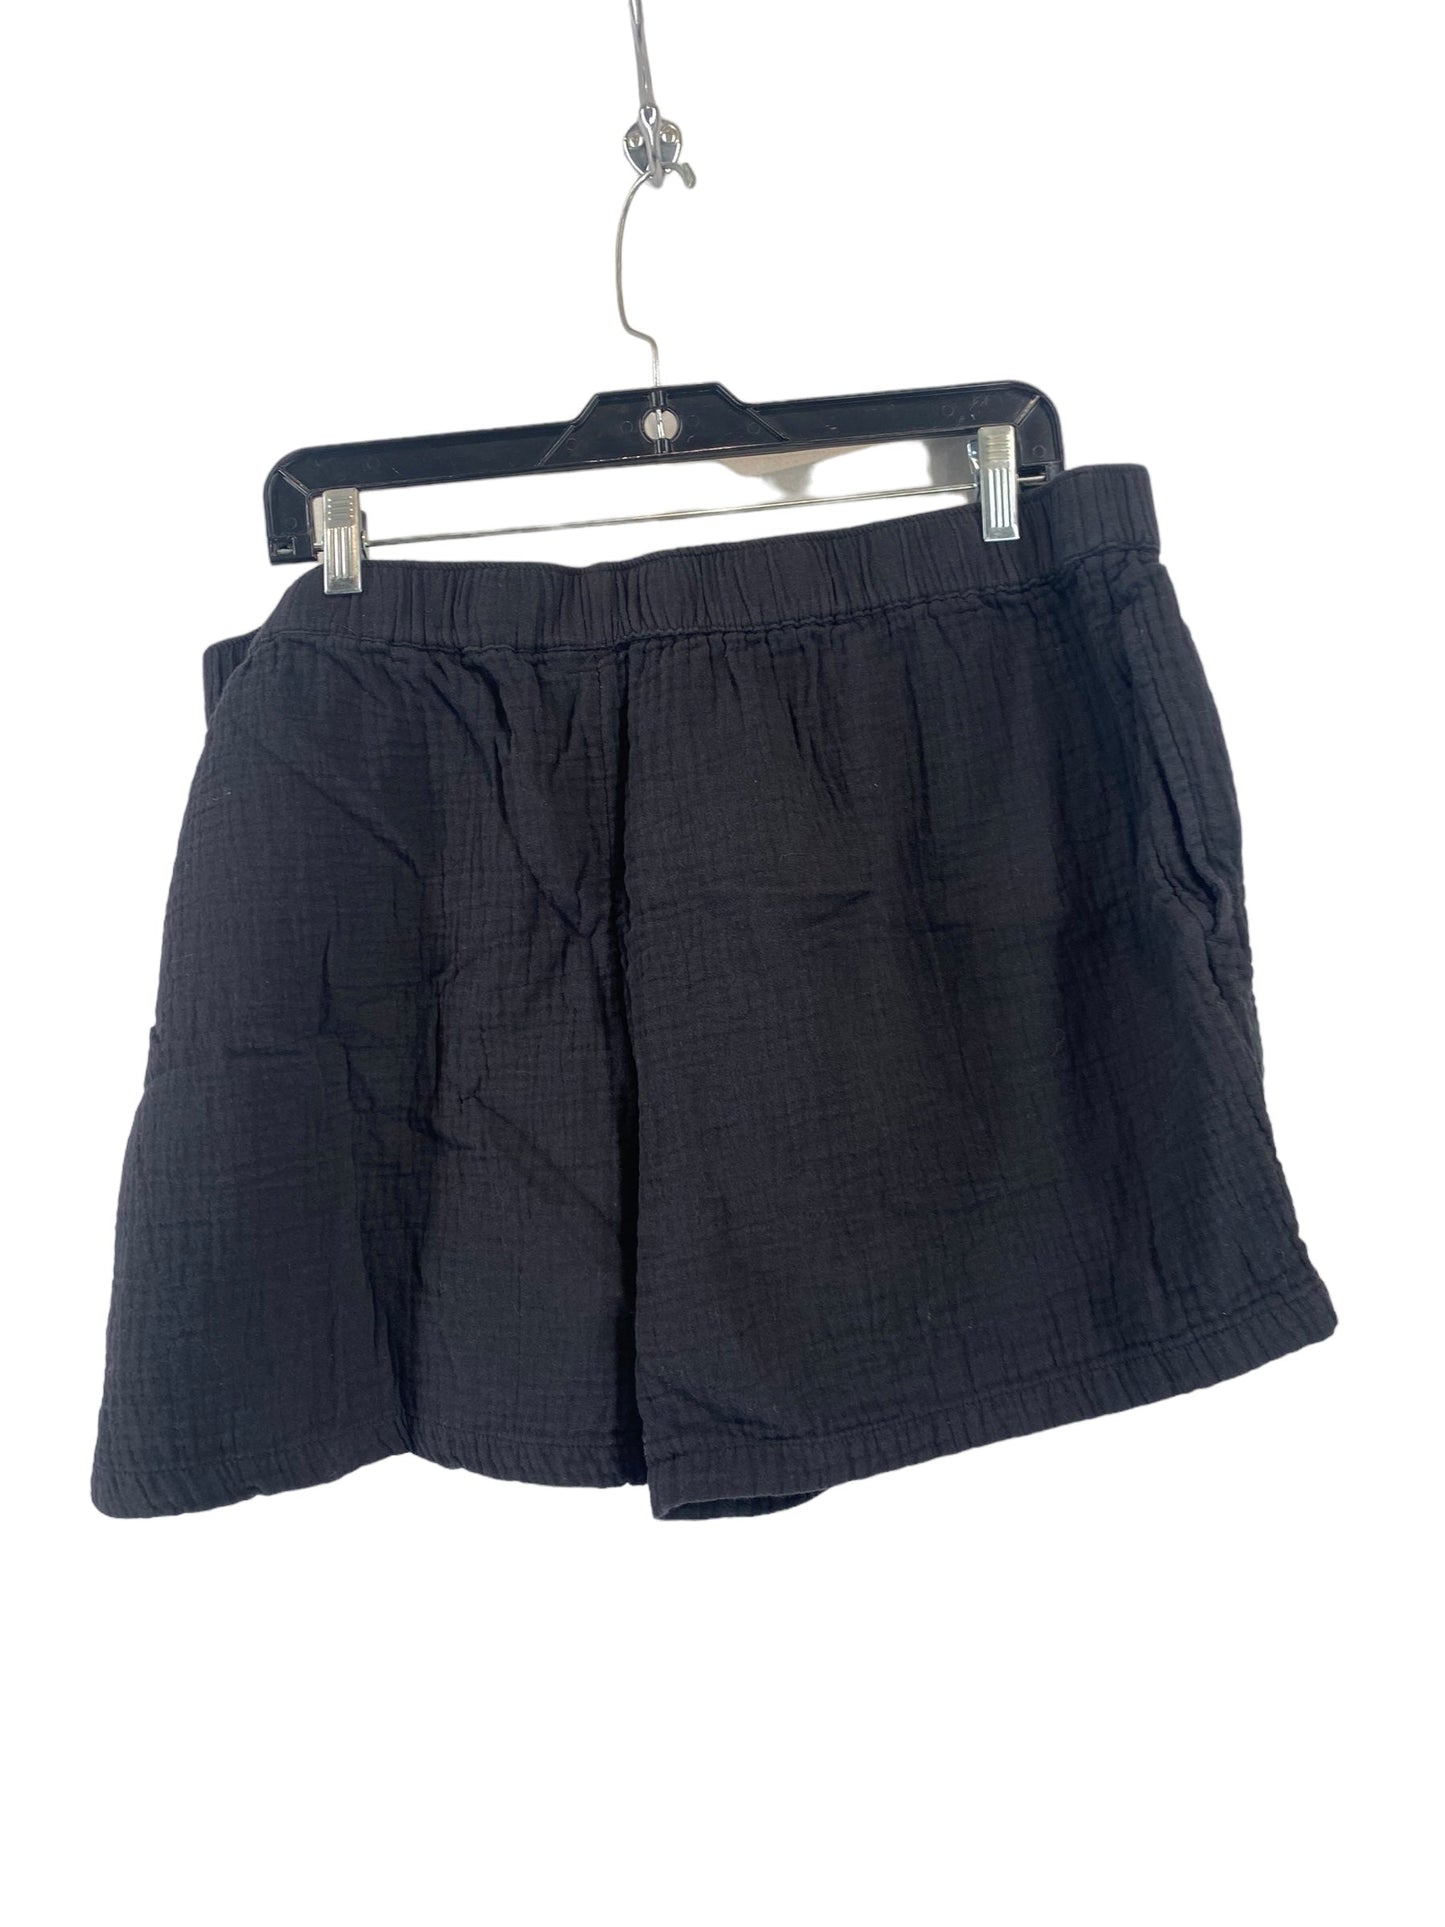 Shorts By Ana  Size: Xl